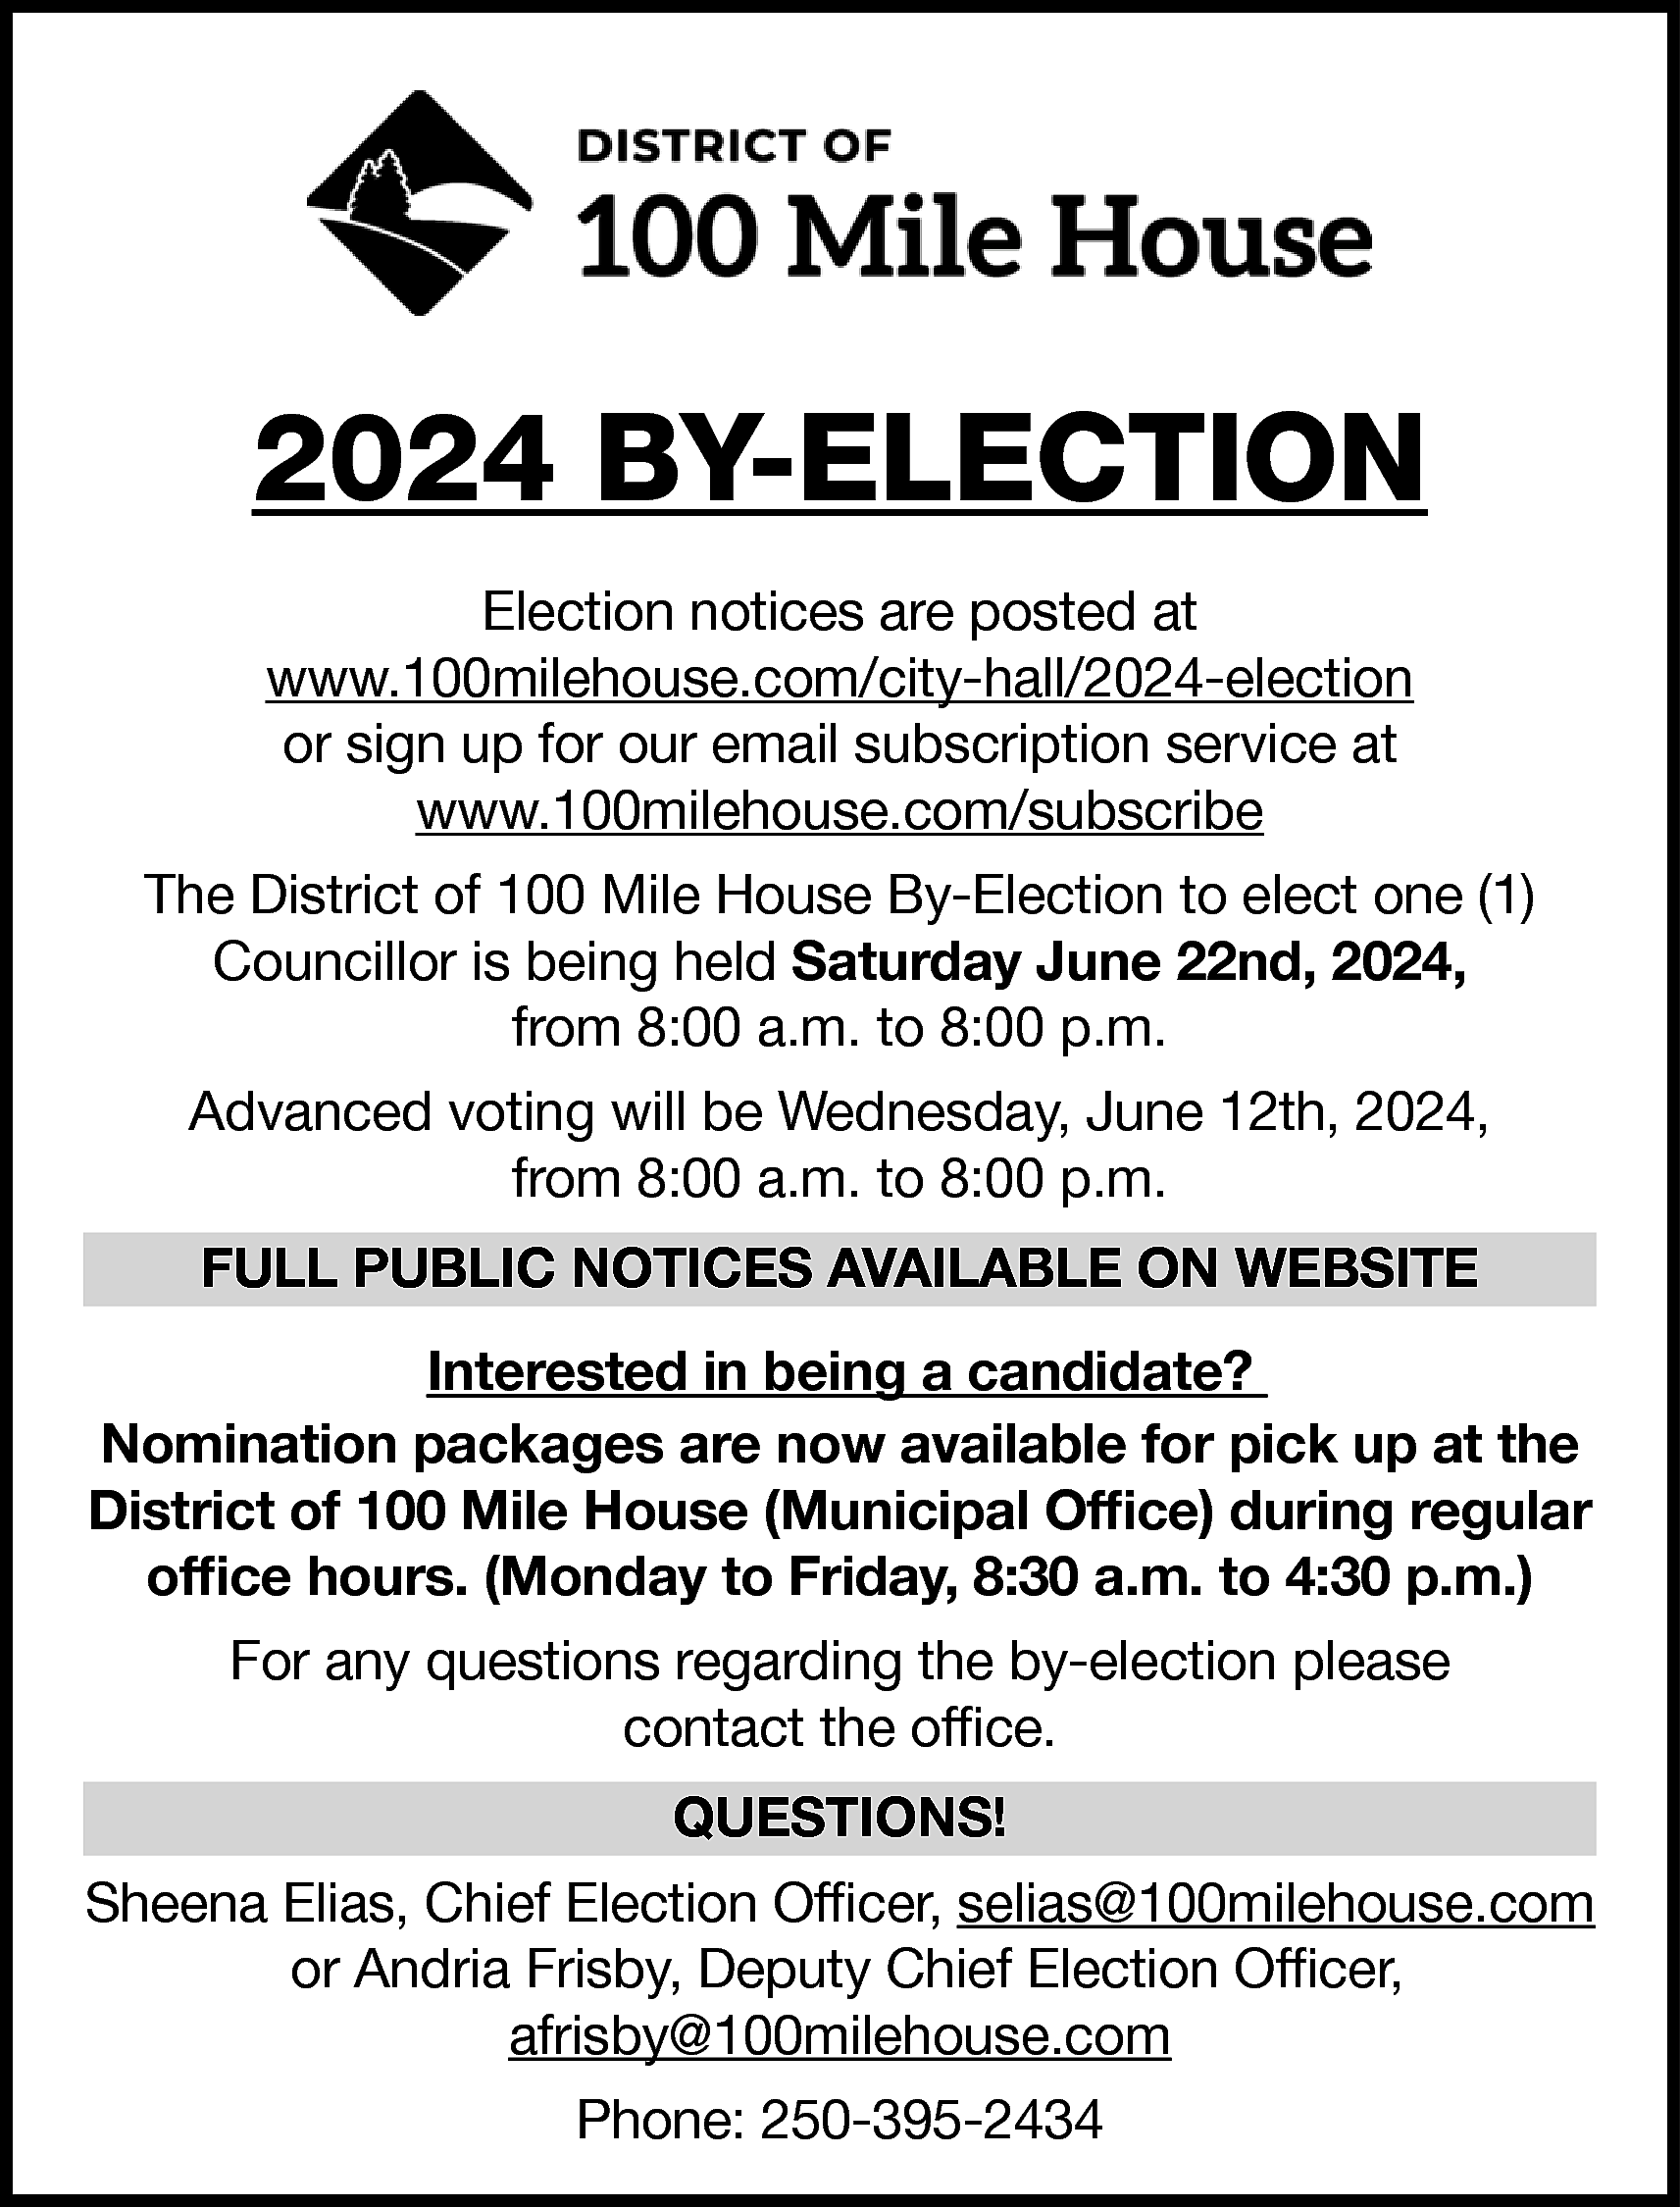 2024 BY-ELECTION <br>Election notices are  2024 BY-ELECTION  Election notices are posted at  www.100milehouse.com/city-hall/2024-election  or sign up for our email subscription service at  www.100milehouse.com/subscribe  The District of 100 Mile House By-Election to elect one (1)  Councillor is being held Saturday June 22nd, 2024,  from 8:00 a.m. to 8:00 p.m.  Advanced voting will be Wednesday, June 12th, 2024,  from 8:00 a.m. to 8:00 p.m.  FULL PUBLIC NOTICES AVAILABLE ON WEBSITE  Interested in being a candidate?  Nomination packages are now available for pick up at the  District of 100 Mile House (Municipal Office) during regular  office hours. (Monday to Friday, 8:30 a.m. to 4:30 p.m.)  For any questions regarding the by-election please  contact the office.  QUESTIONS!  Sheena Elias, Chief Election Officer, selias@100milehouse.com  or Andria Frisby, Deputy Chief Election Officer,  afrisby@100milehouse.com  Phone: 250-395-2434    